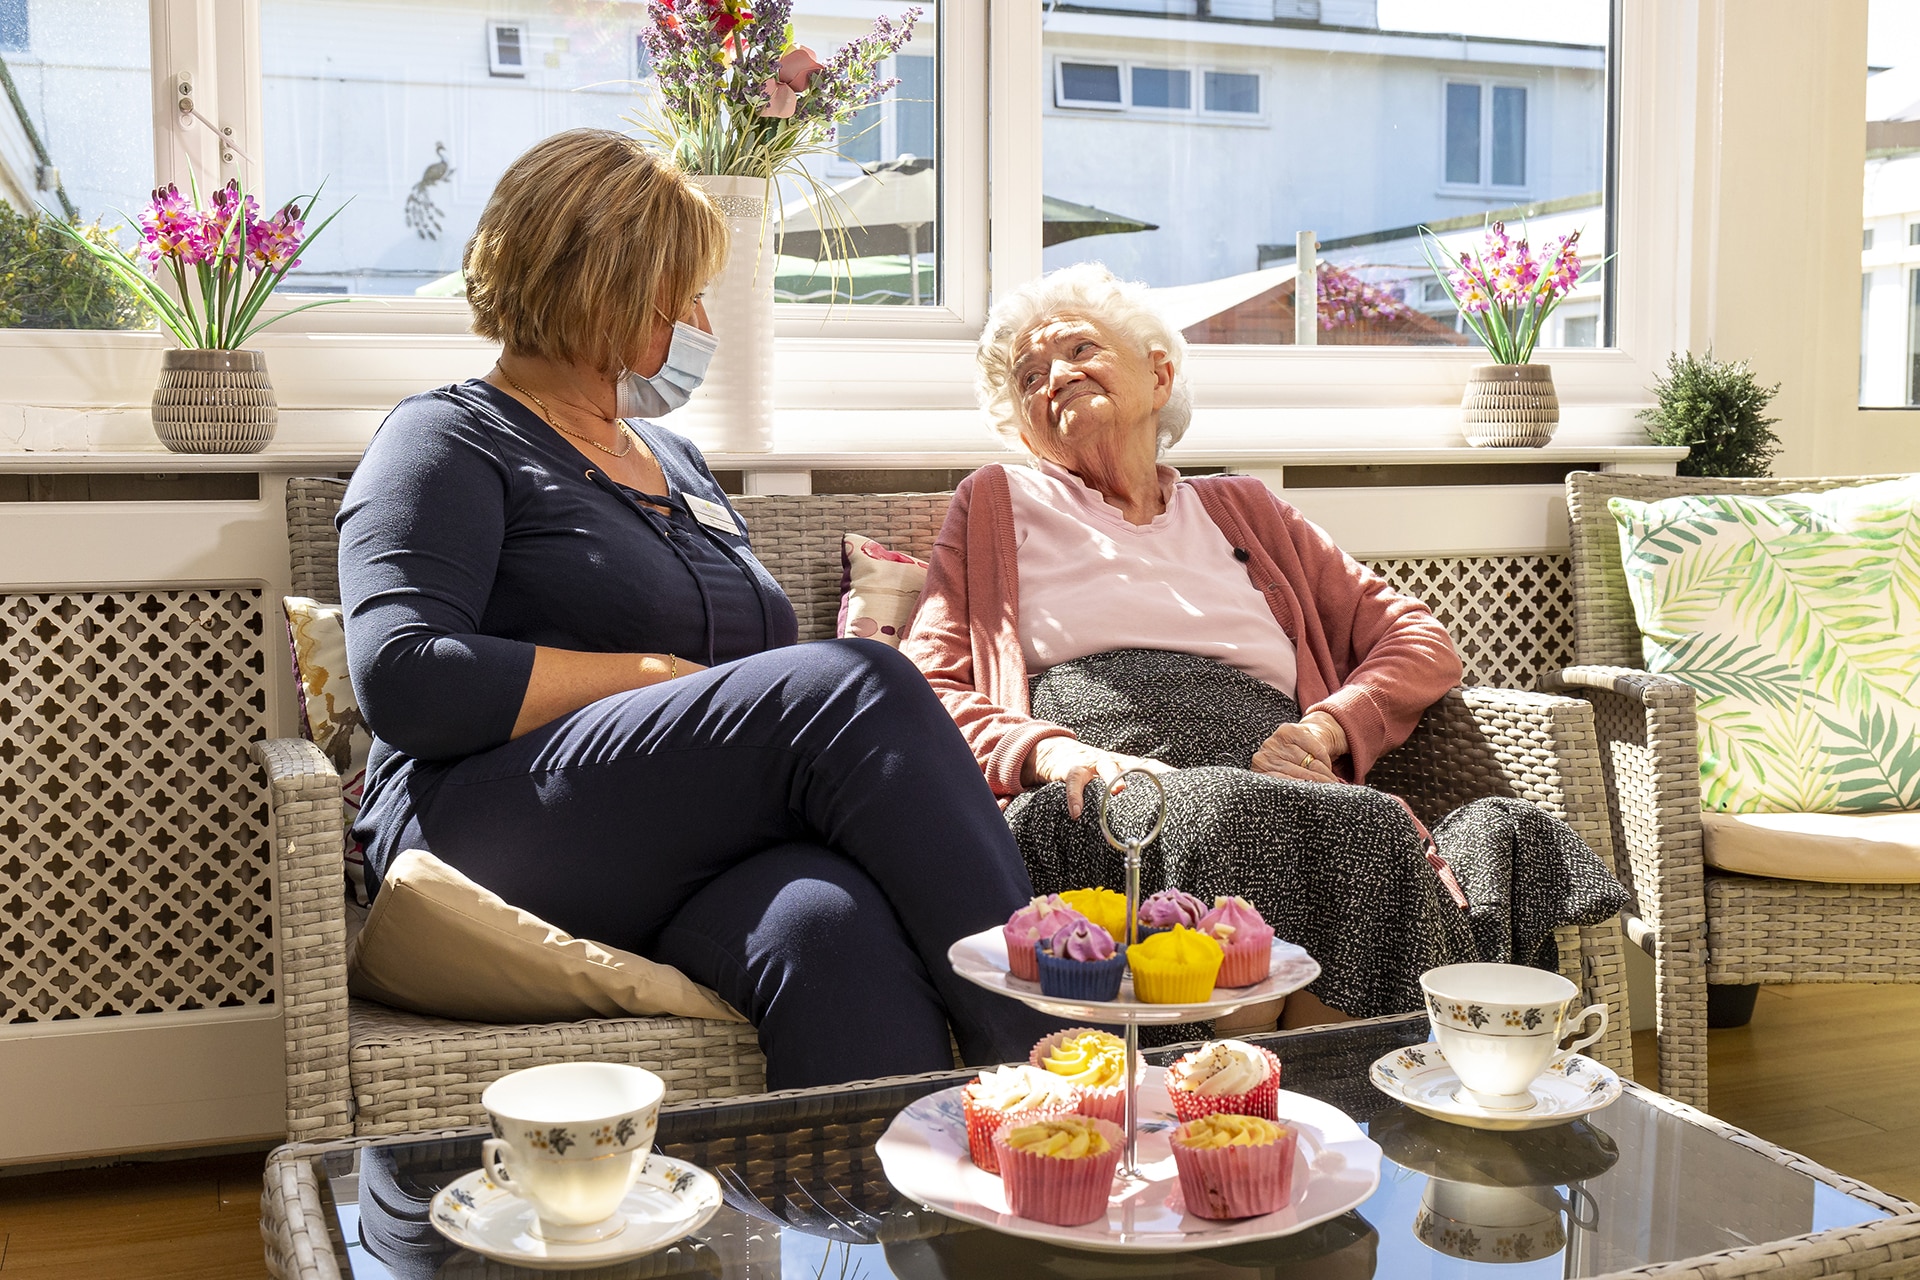 Resident and manager chatting in the sun room at Cavell House Care Home in Shoreham-by-Sea.